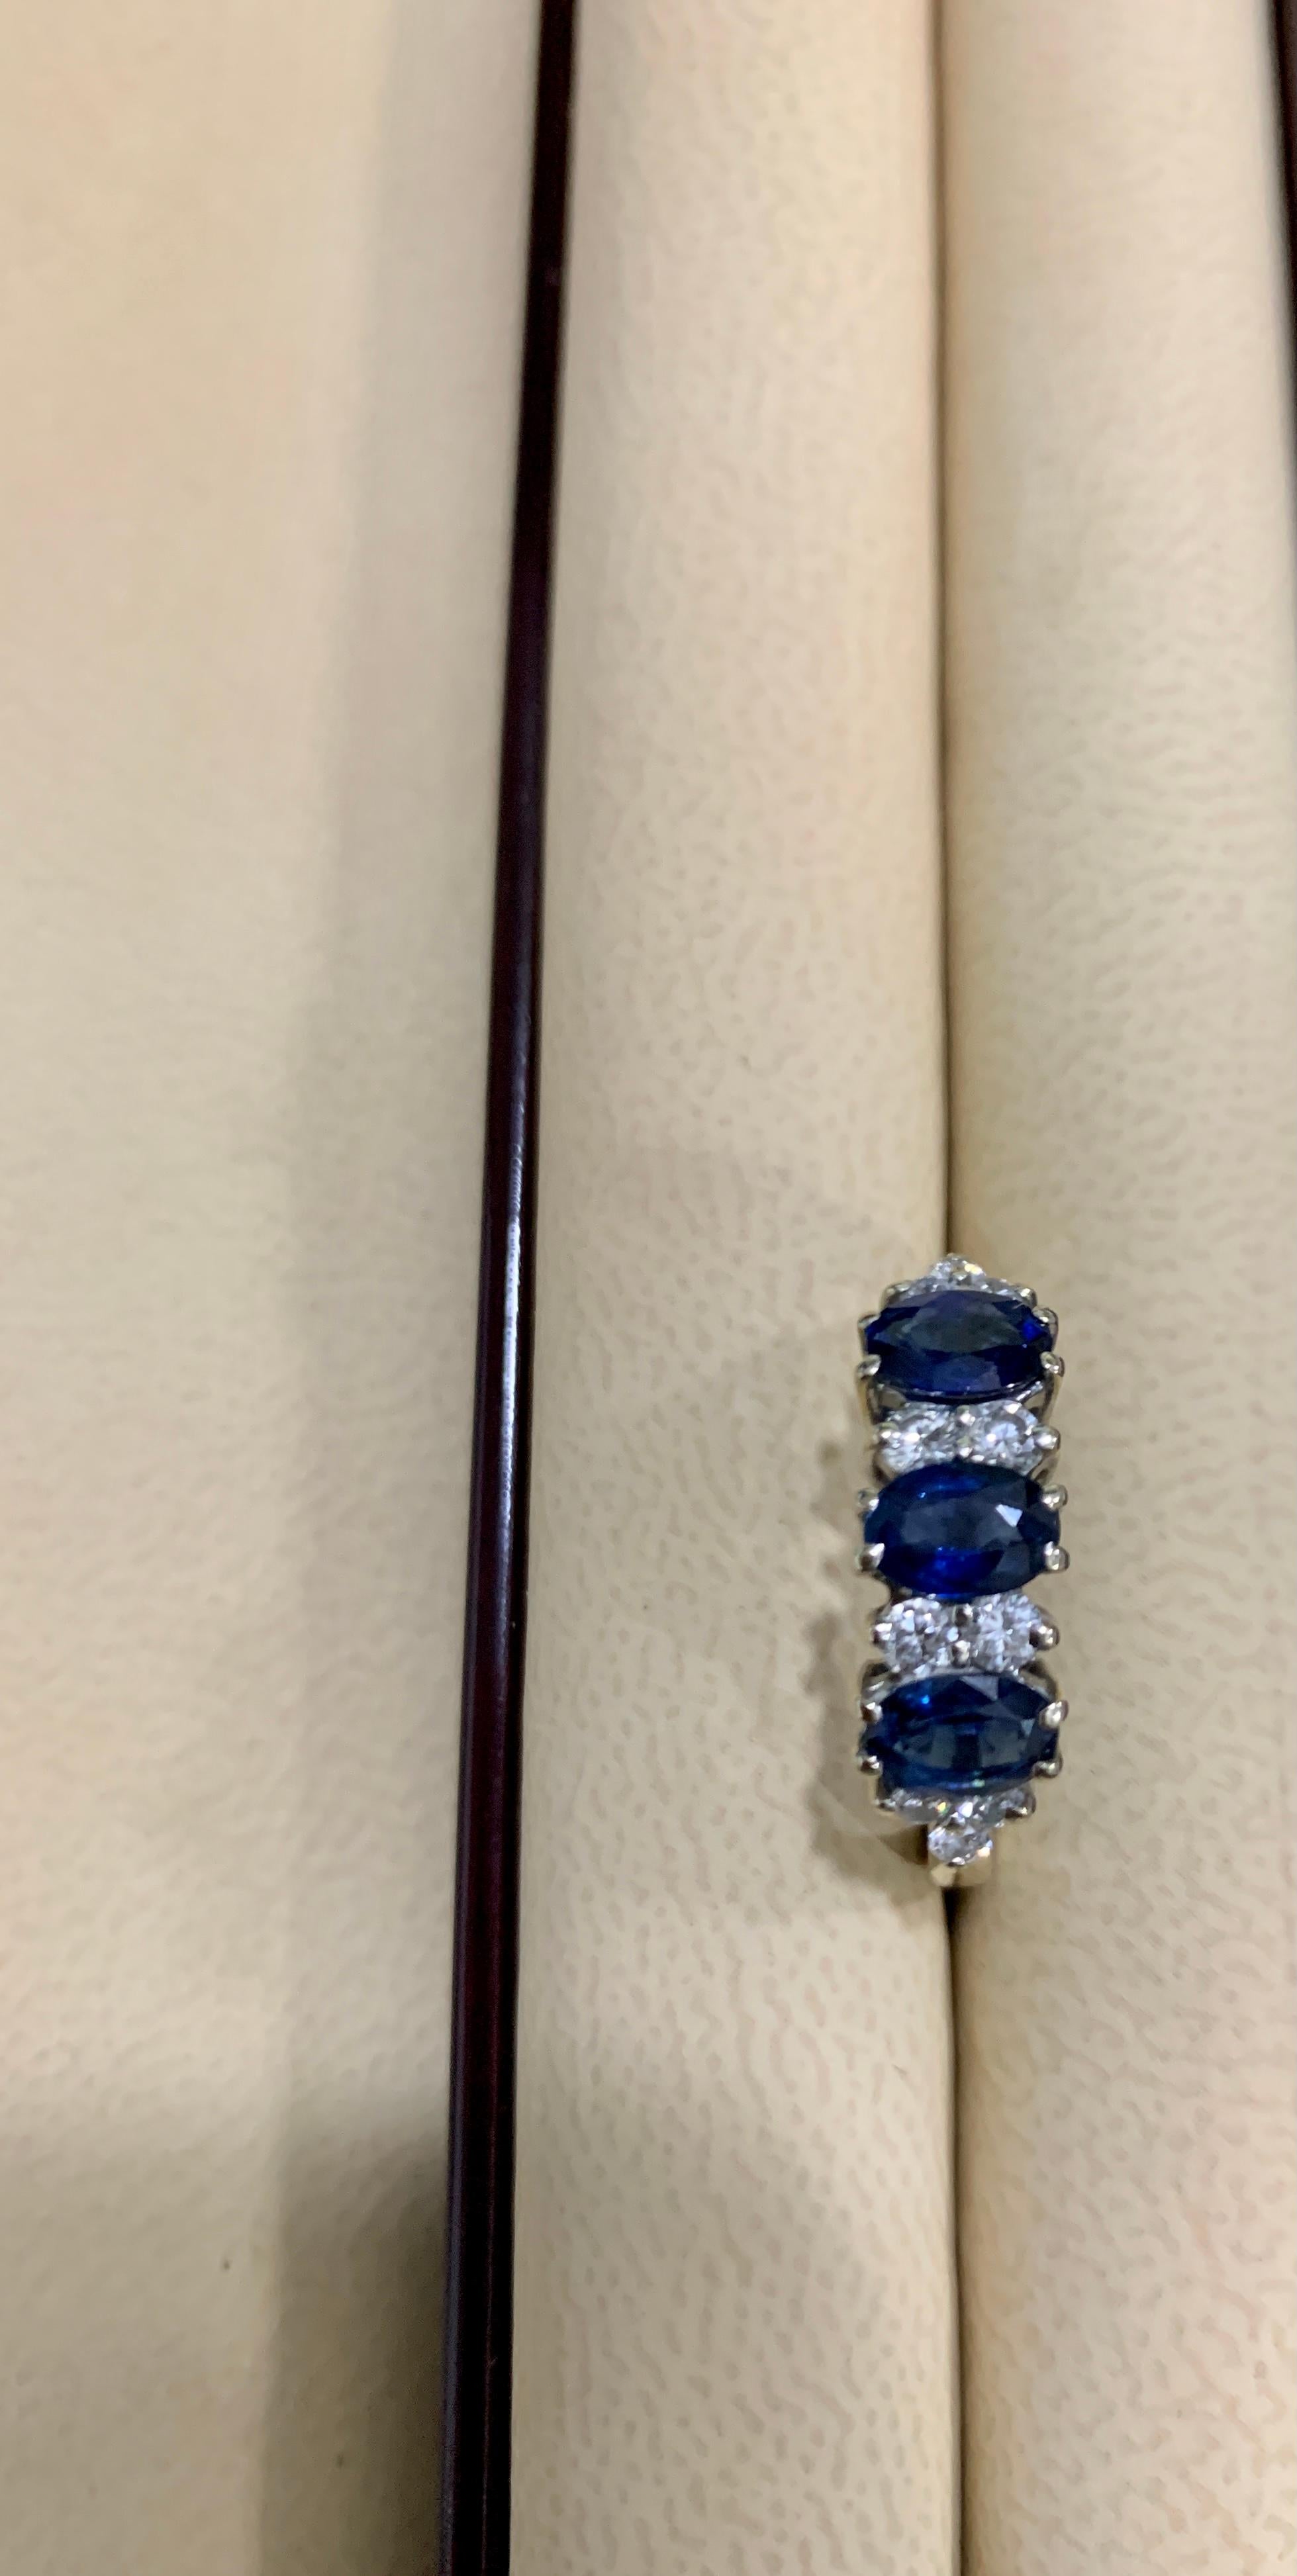 2.5ct Blue Sapphire & 0.6ct Diamond Cocktail Ring in 18 Karat White Gold Estate For Sale 1